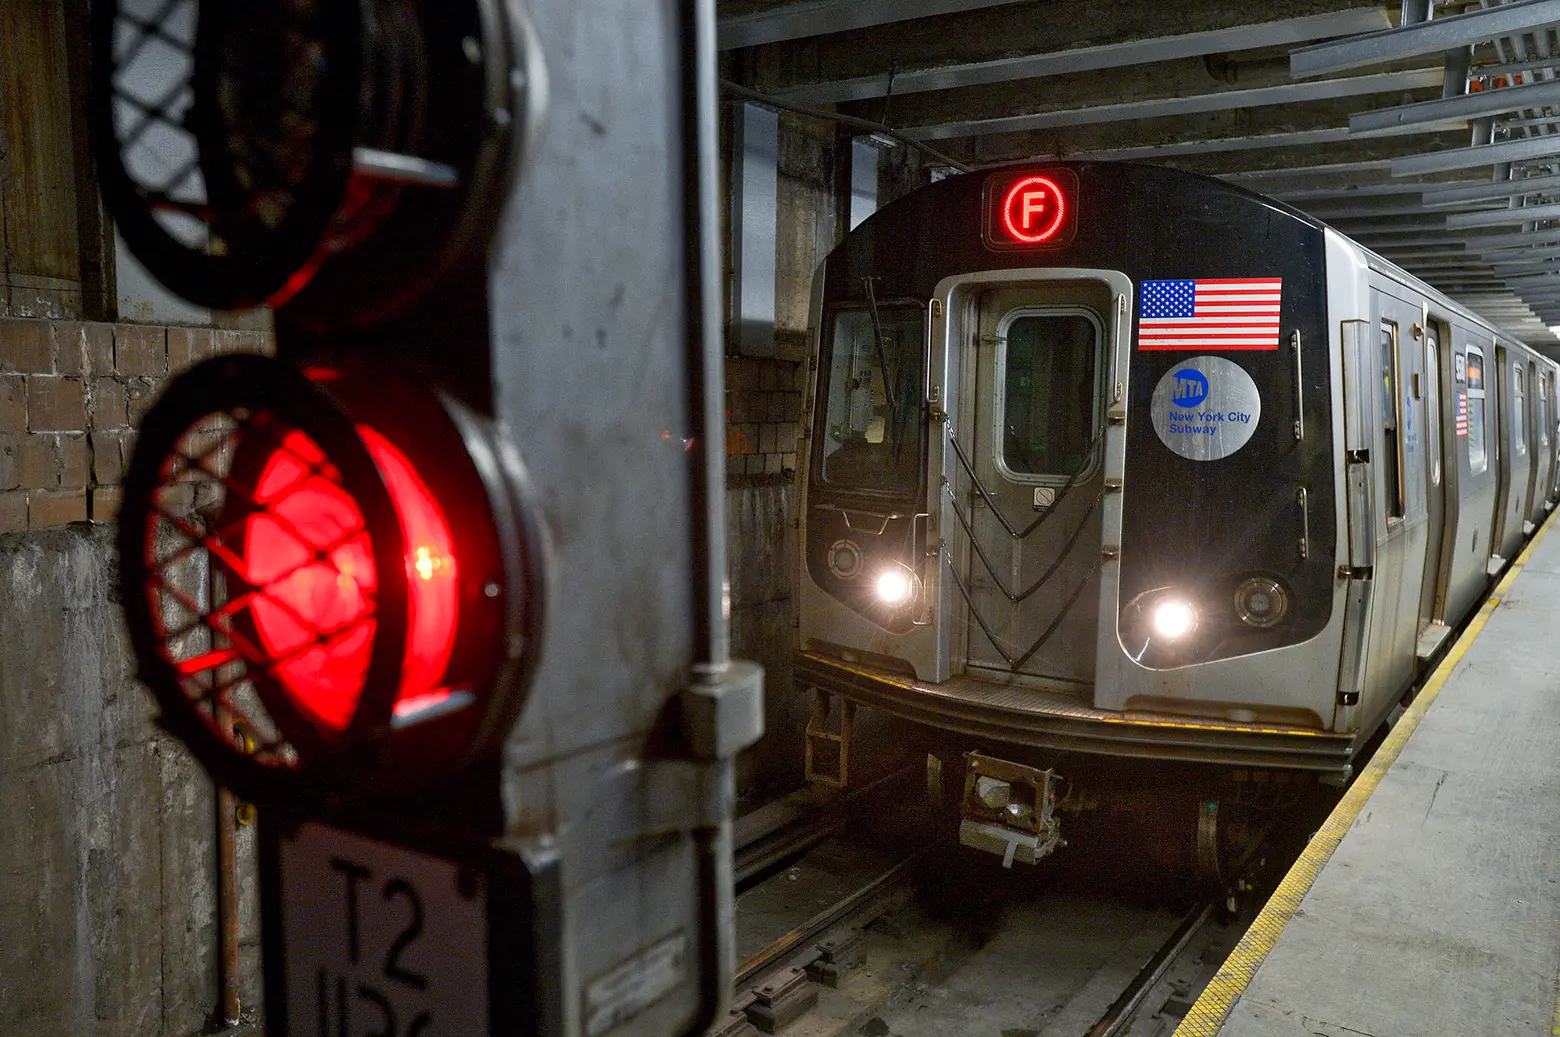 The F train will shut down on nights and weekends for the next 8 months